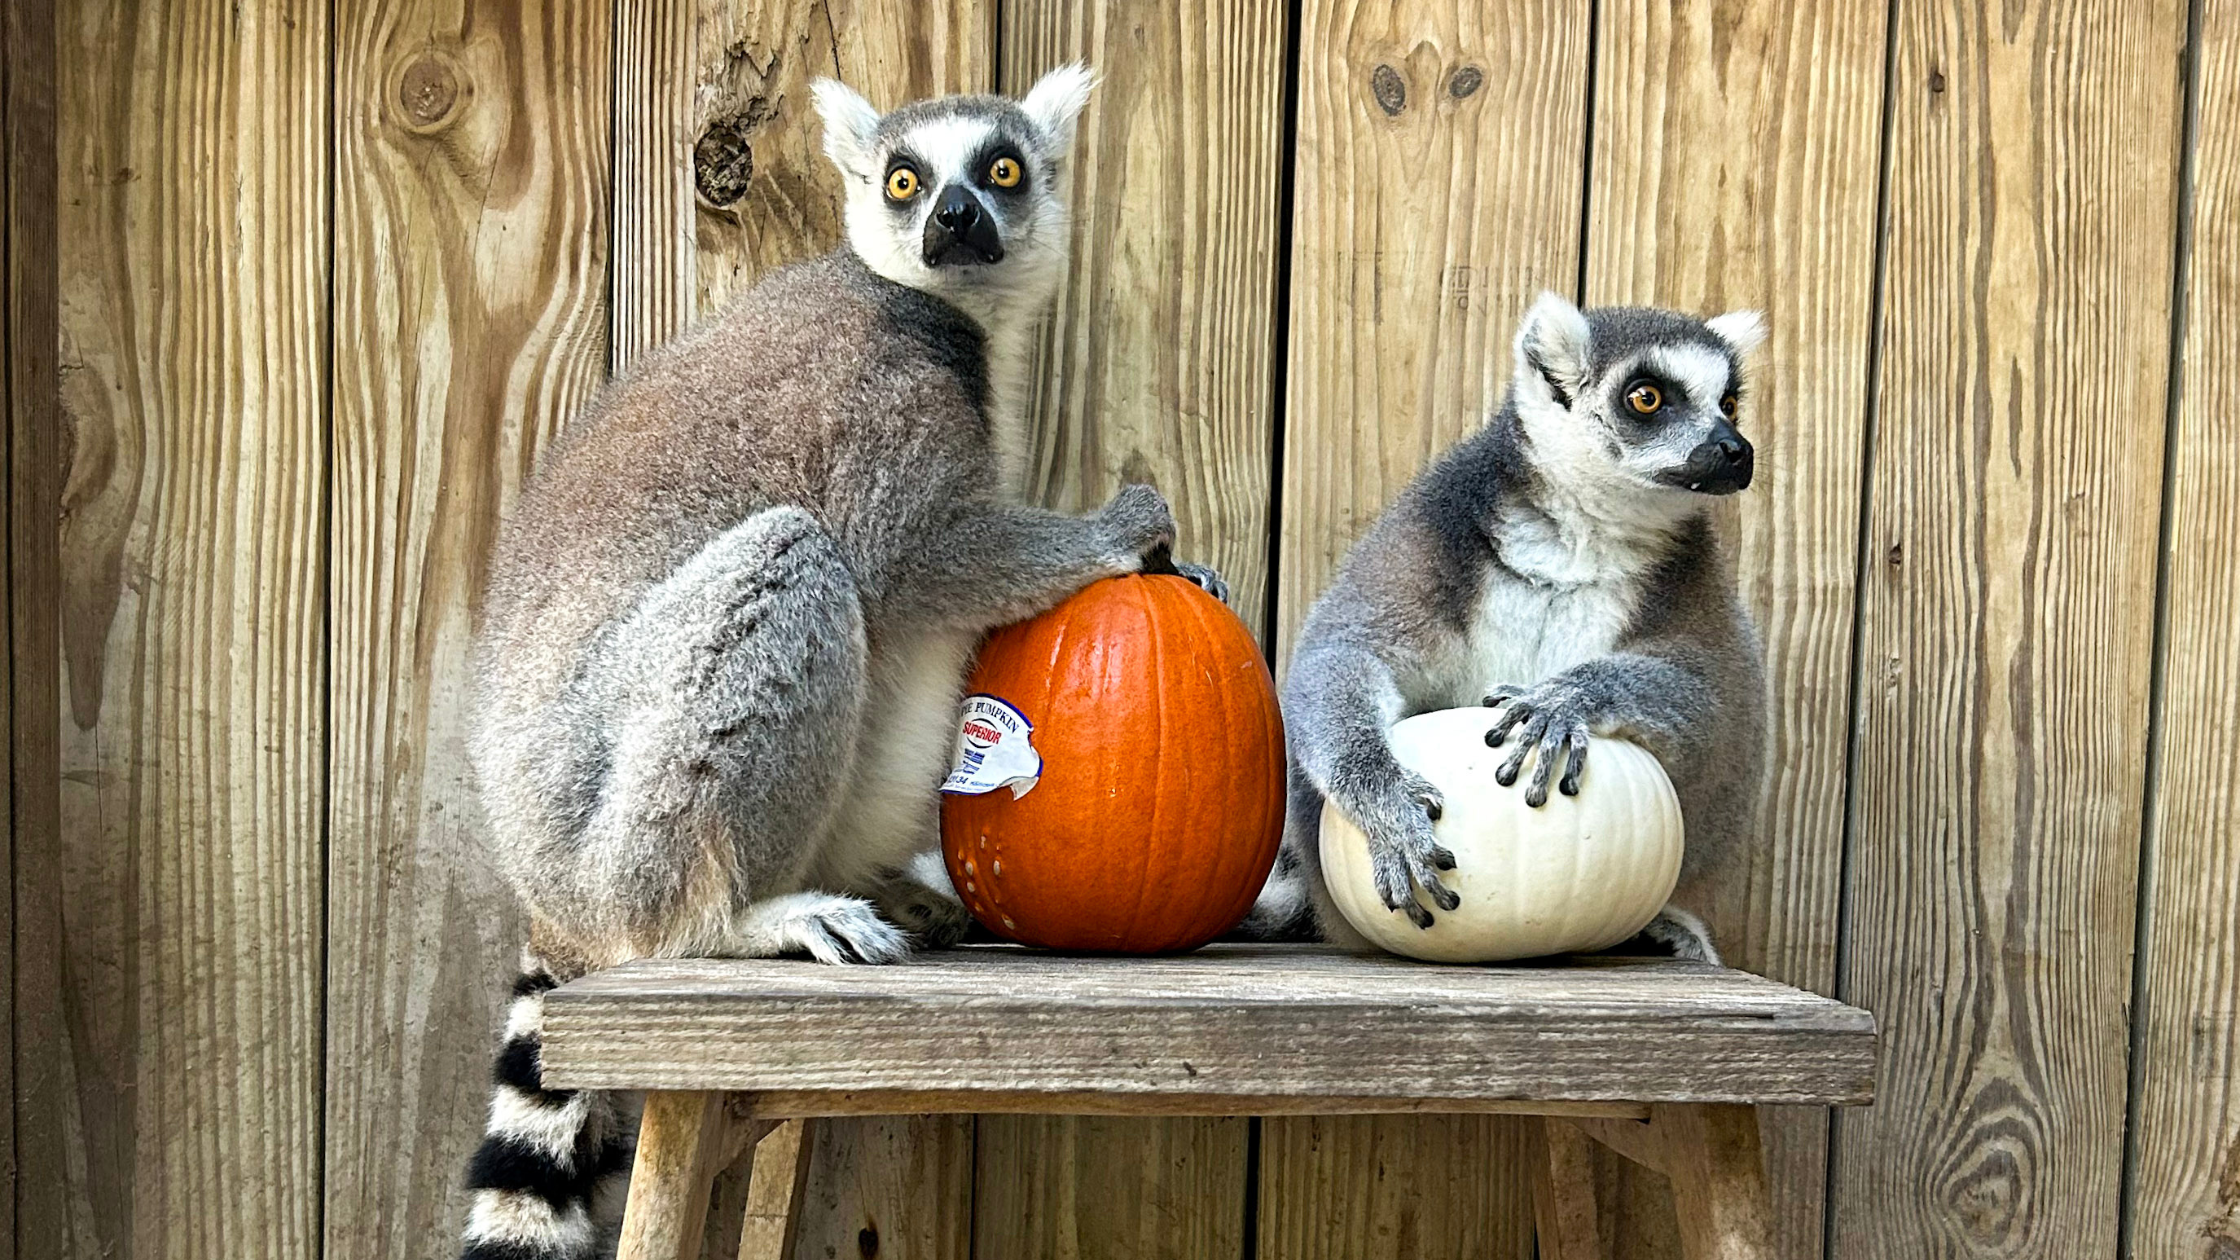 Two ring-tailed lemurs sitting with pumpkins in preparation for the pumpkin painting event at Wild Florida